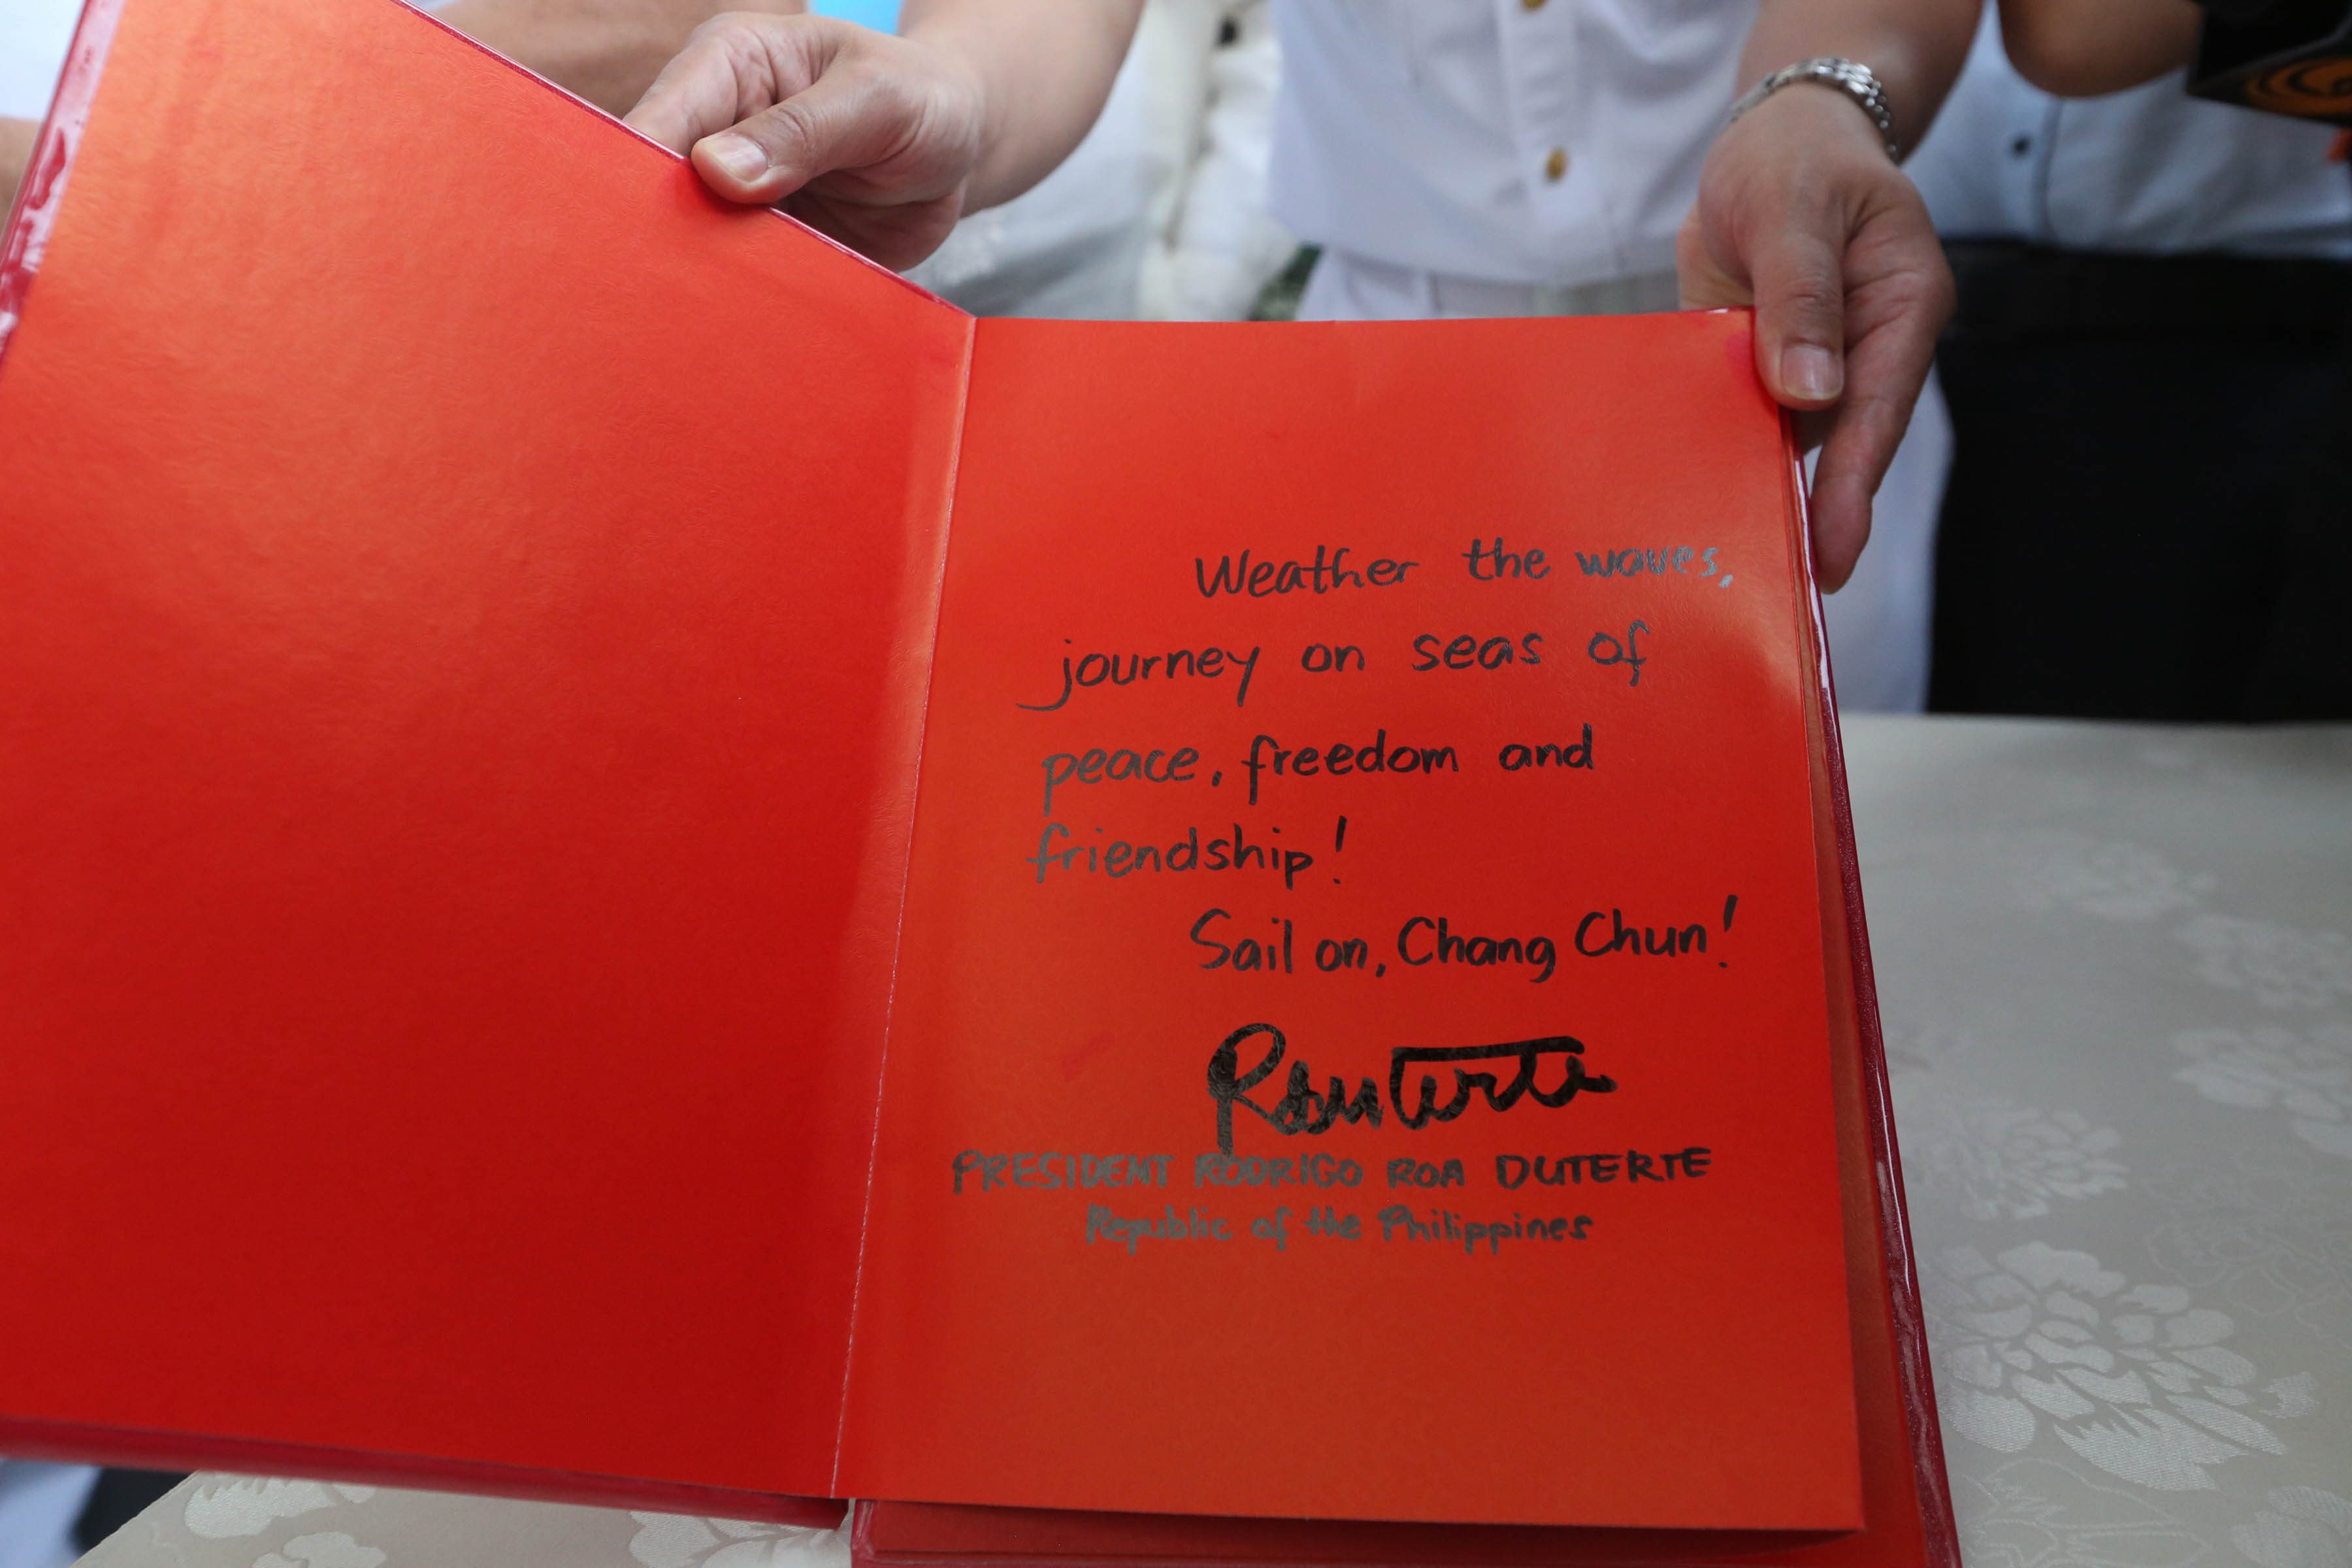 'SEAS OF PEACE.' The Philippine President writes a message of peace as he signs Chang Chun's guest book. 